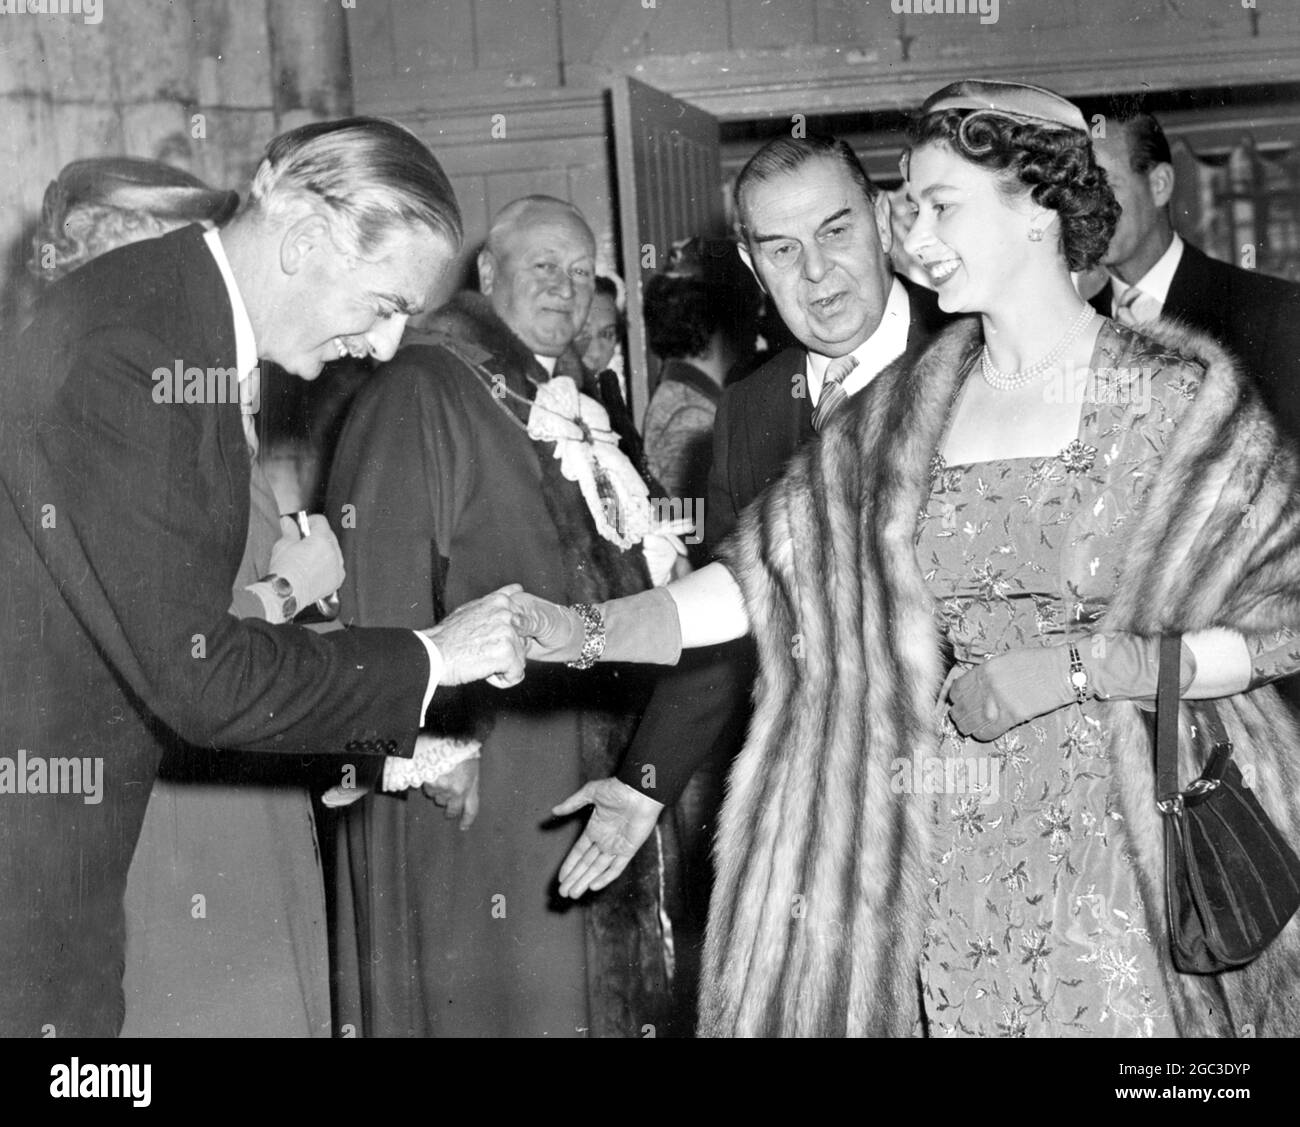 London: British premier, Sir Anthony Eden, who has been under fire from the socialists regarding the ‘Crabb Affair, in the house of commons, greets the queen, who wears a fur wrap and small close fitting hat, on her arrival at the Guildhall, where she attended a ceremony which marked the 40th anniversary of the National Savings Committee, Queen Elizabeth was scheduled to take tea with ex King Leopold of Belgium at Buckingham Palace in the afternoon. 15 May 1956 Stock Photo